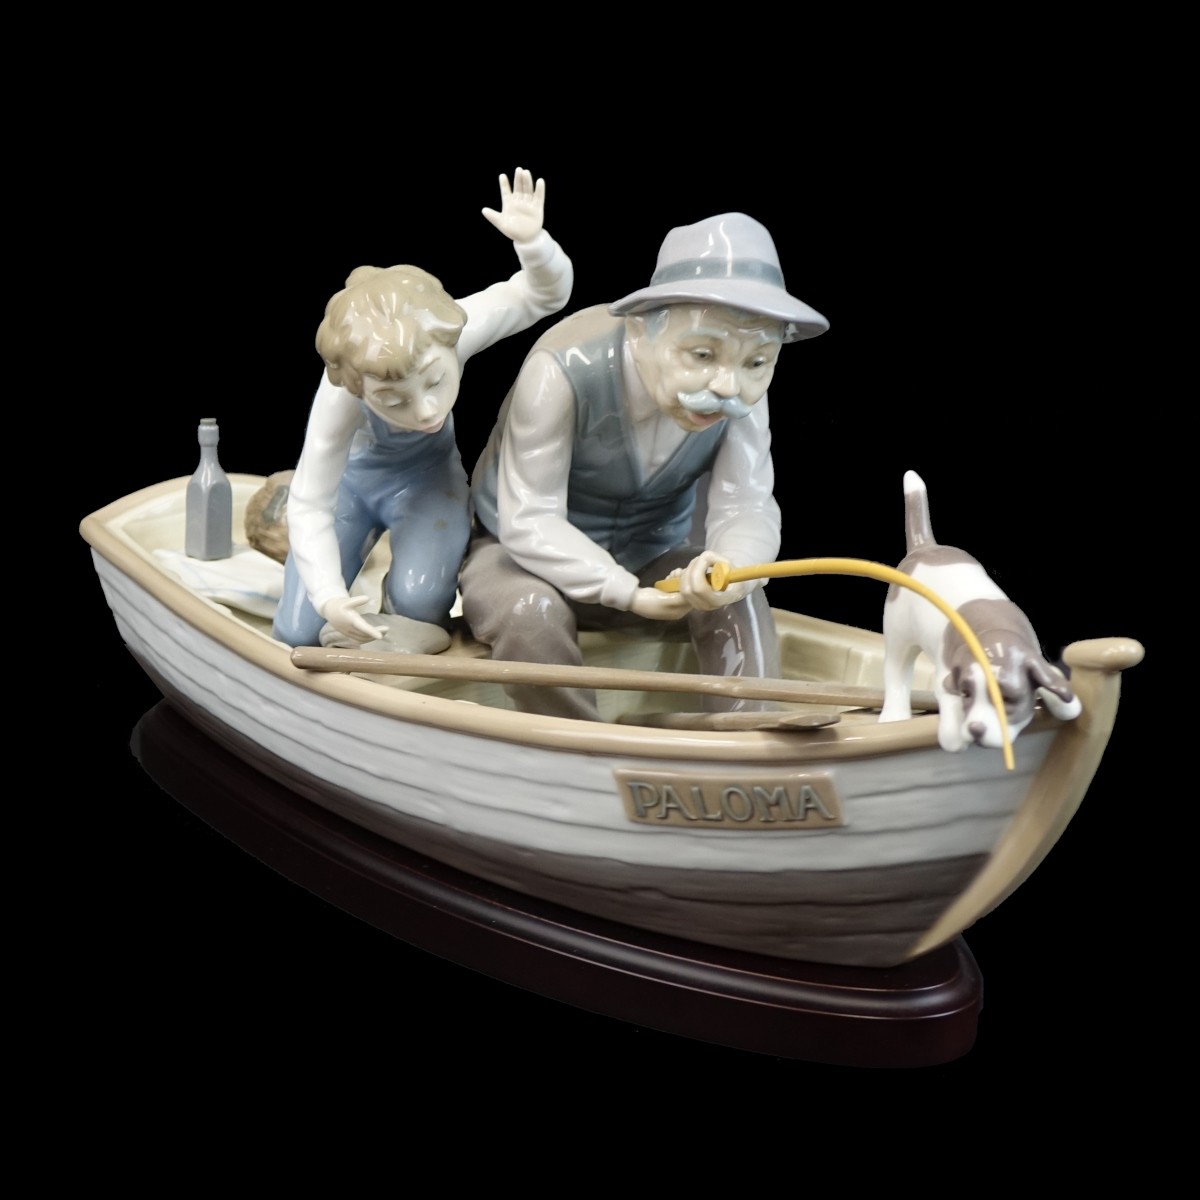 Lladro "Fishing with Gramps" Porcelain Sculpture